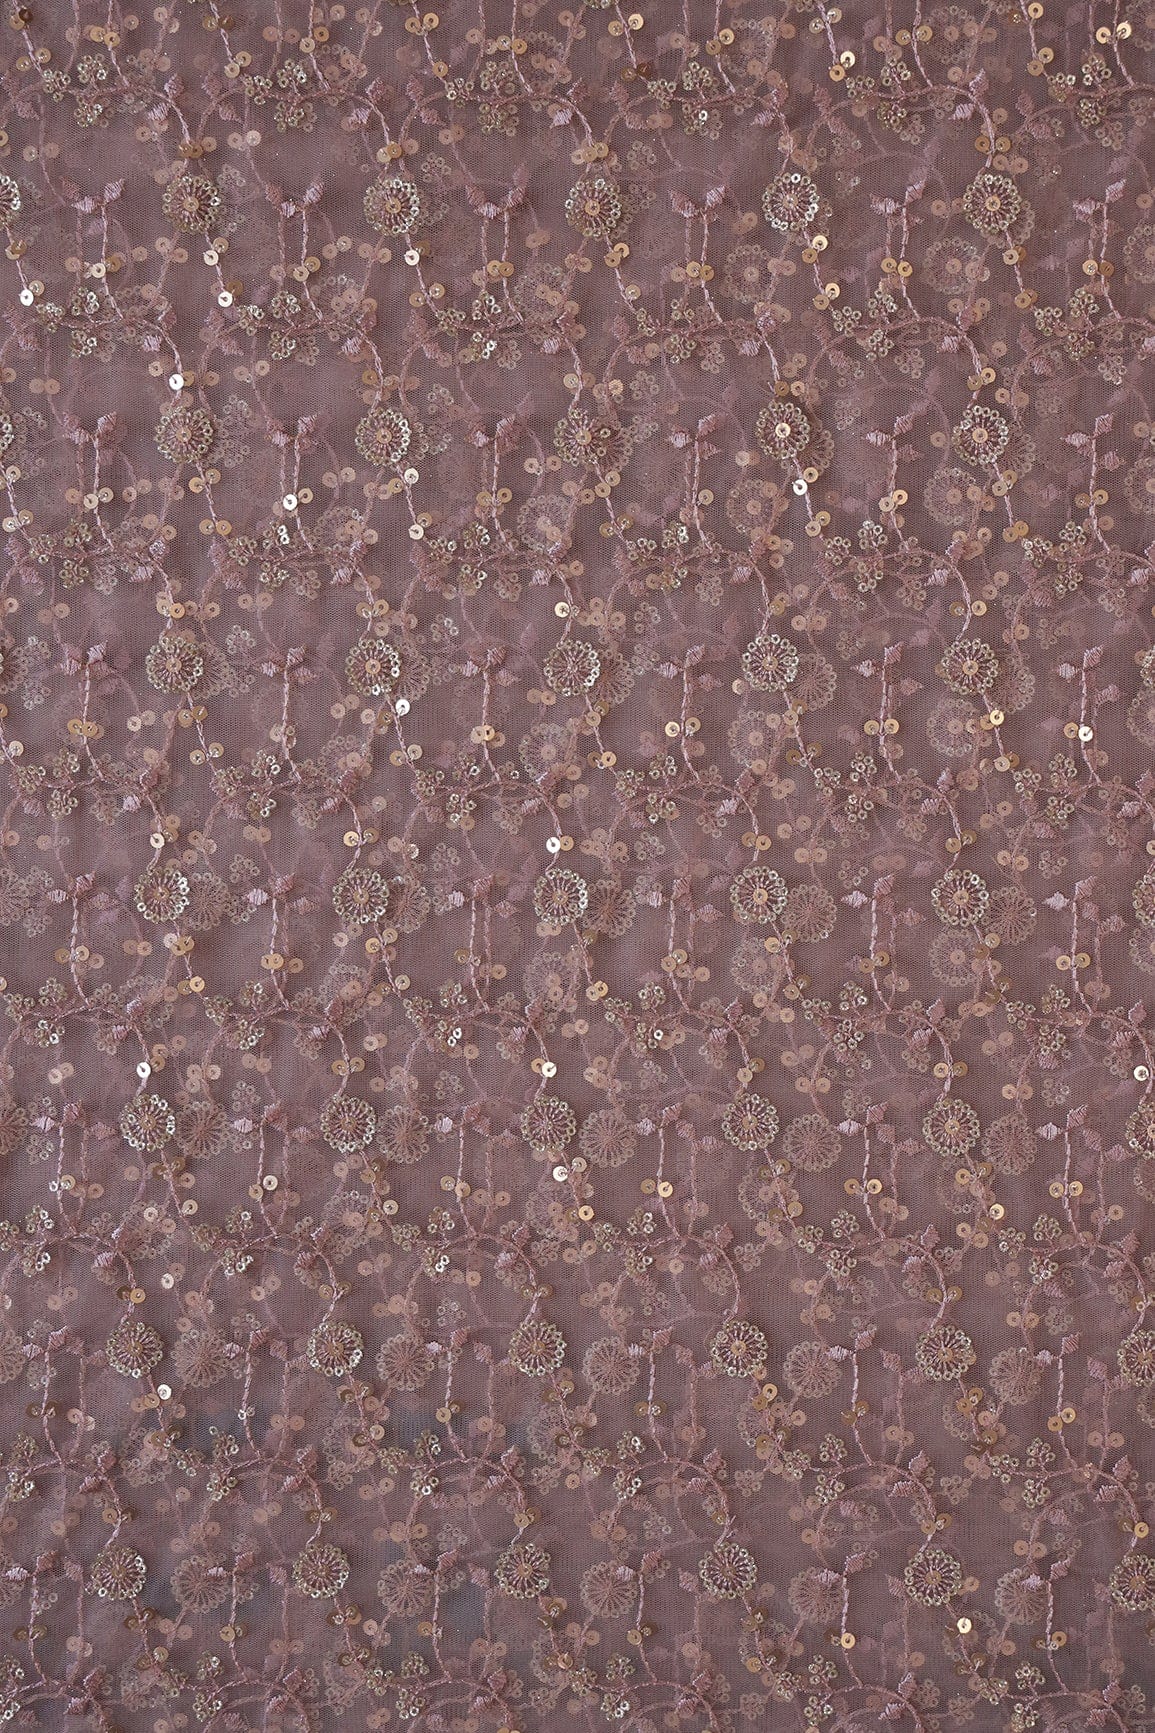 doeraa Embroidery Fabrics 1.50 Meter Cut Piece Of Gold Sequins With Thread Floral Embroidery Work On Mauve Soft Net Fabric